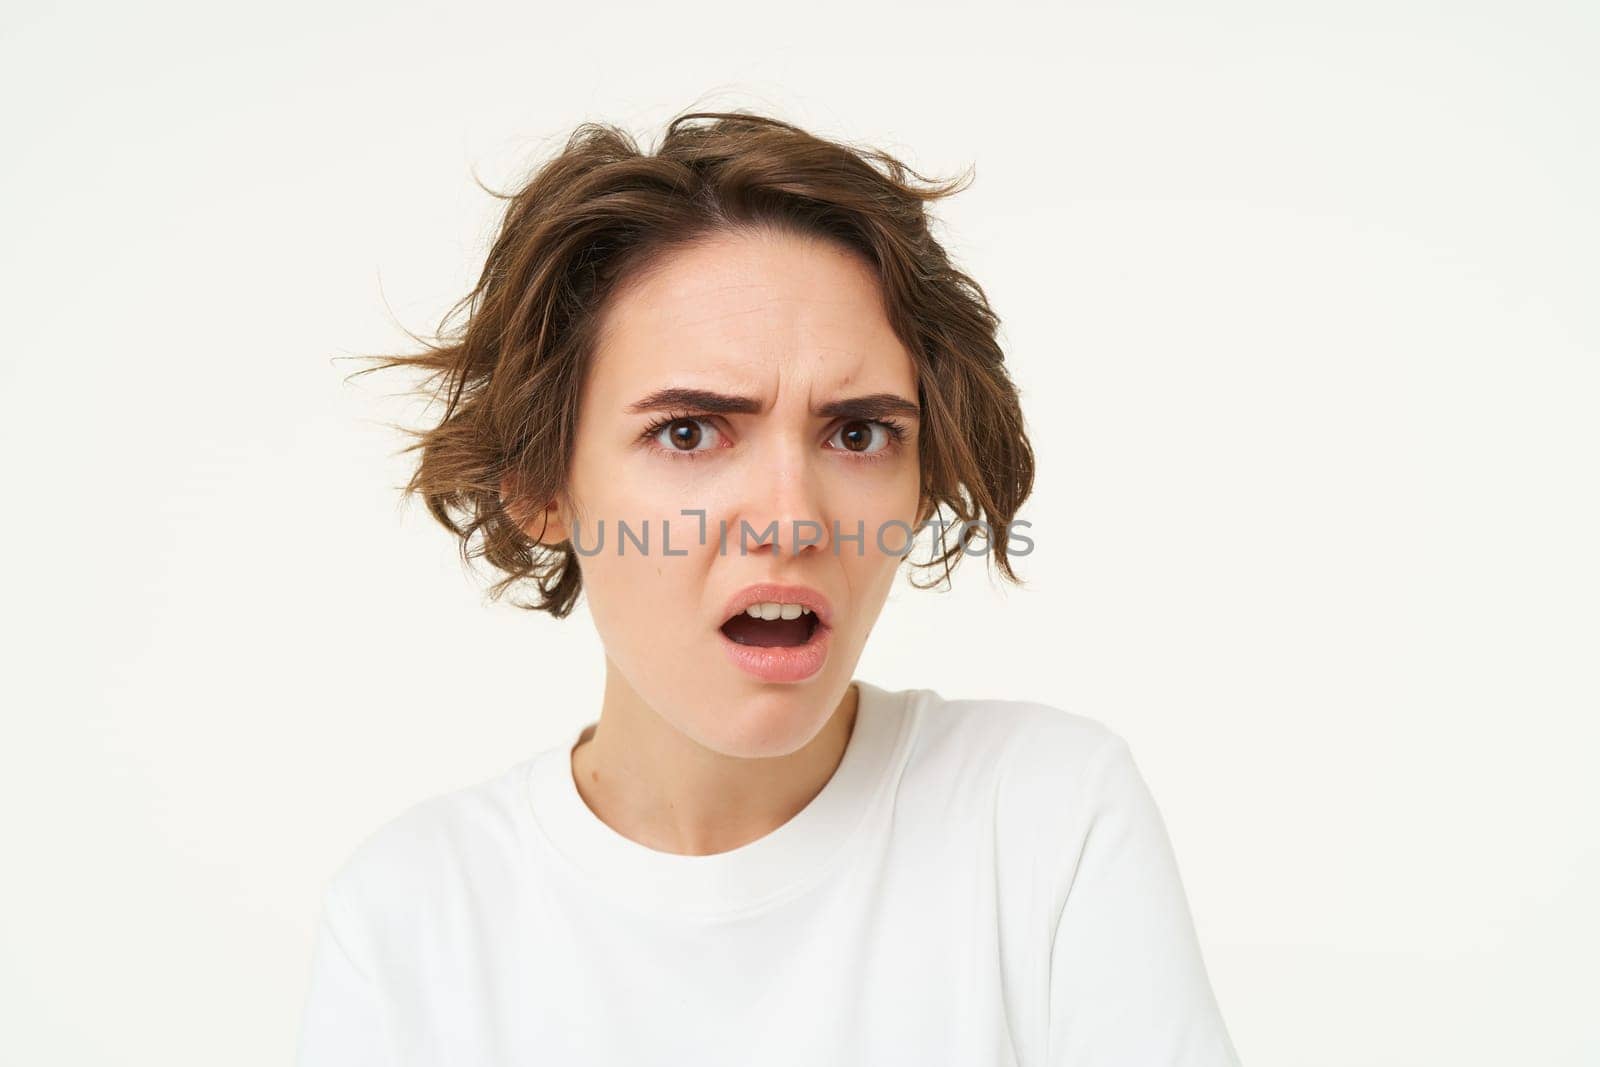 Close up portrait of shocked woman looking insulated, bothered by something, pouting and sulking, posing over white background. copy space